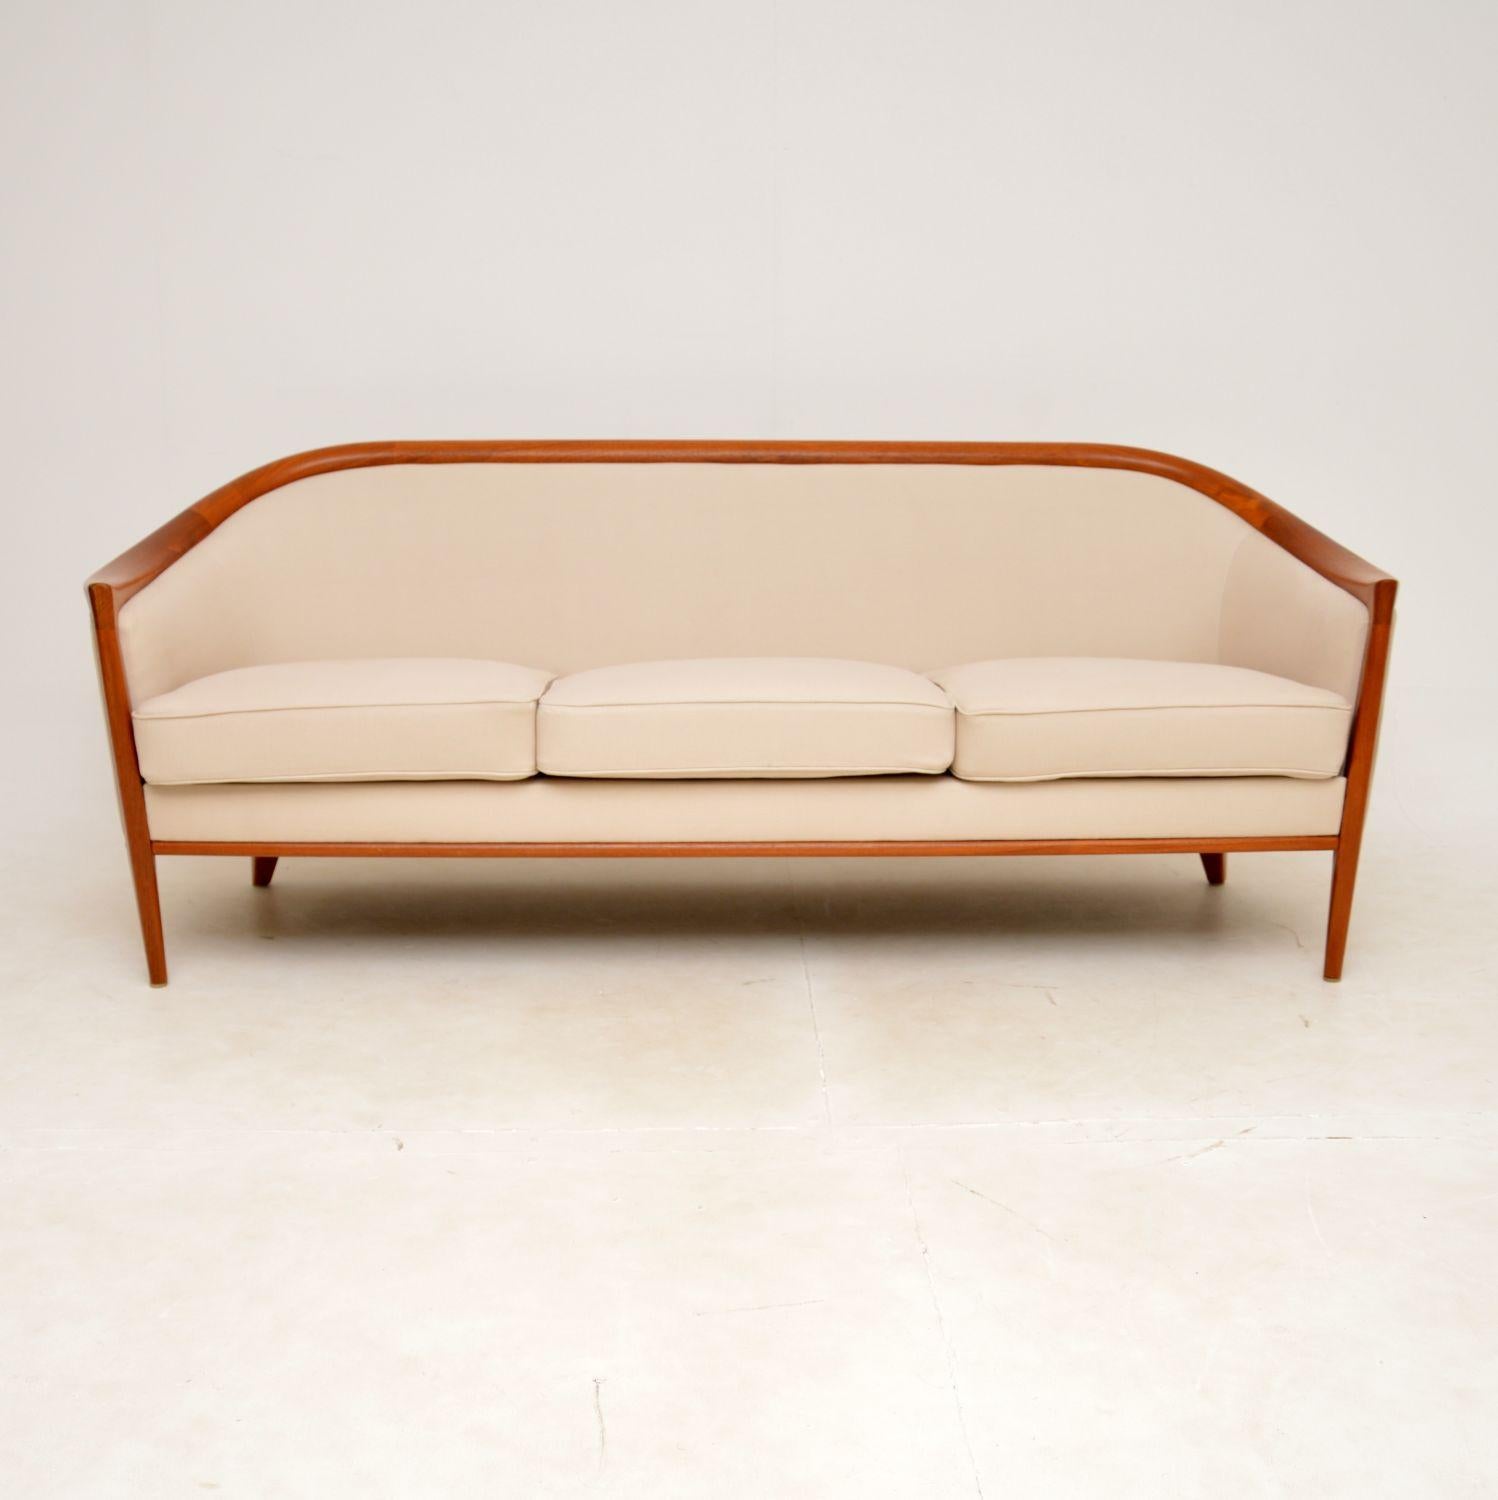 An absolutely stunning vintage Swedish sofa in teak. This was designed by Bertil Fridhagen and was made by Broderna Andersson in the 1960s.

The quality is outstanding, the solid teak frame has beautiful, sweeping curves. This is well sprung and